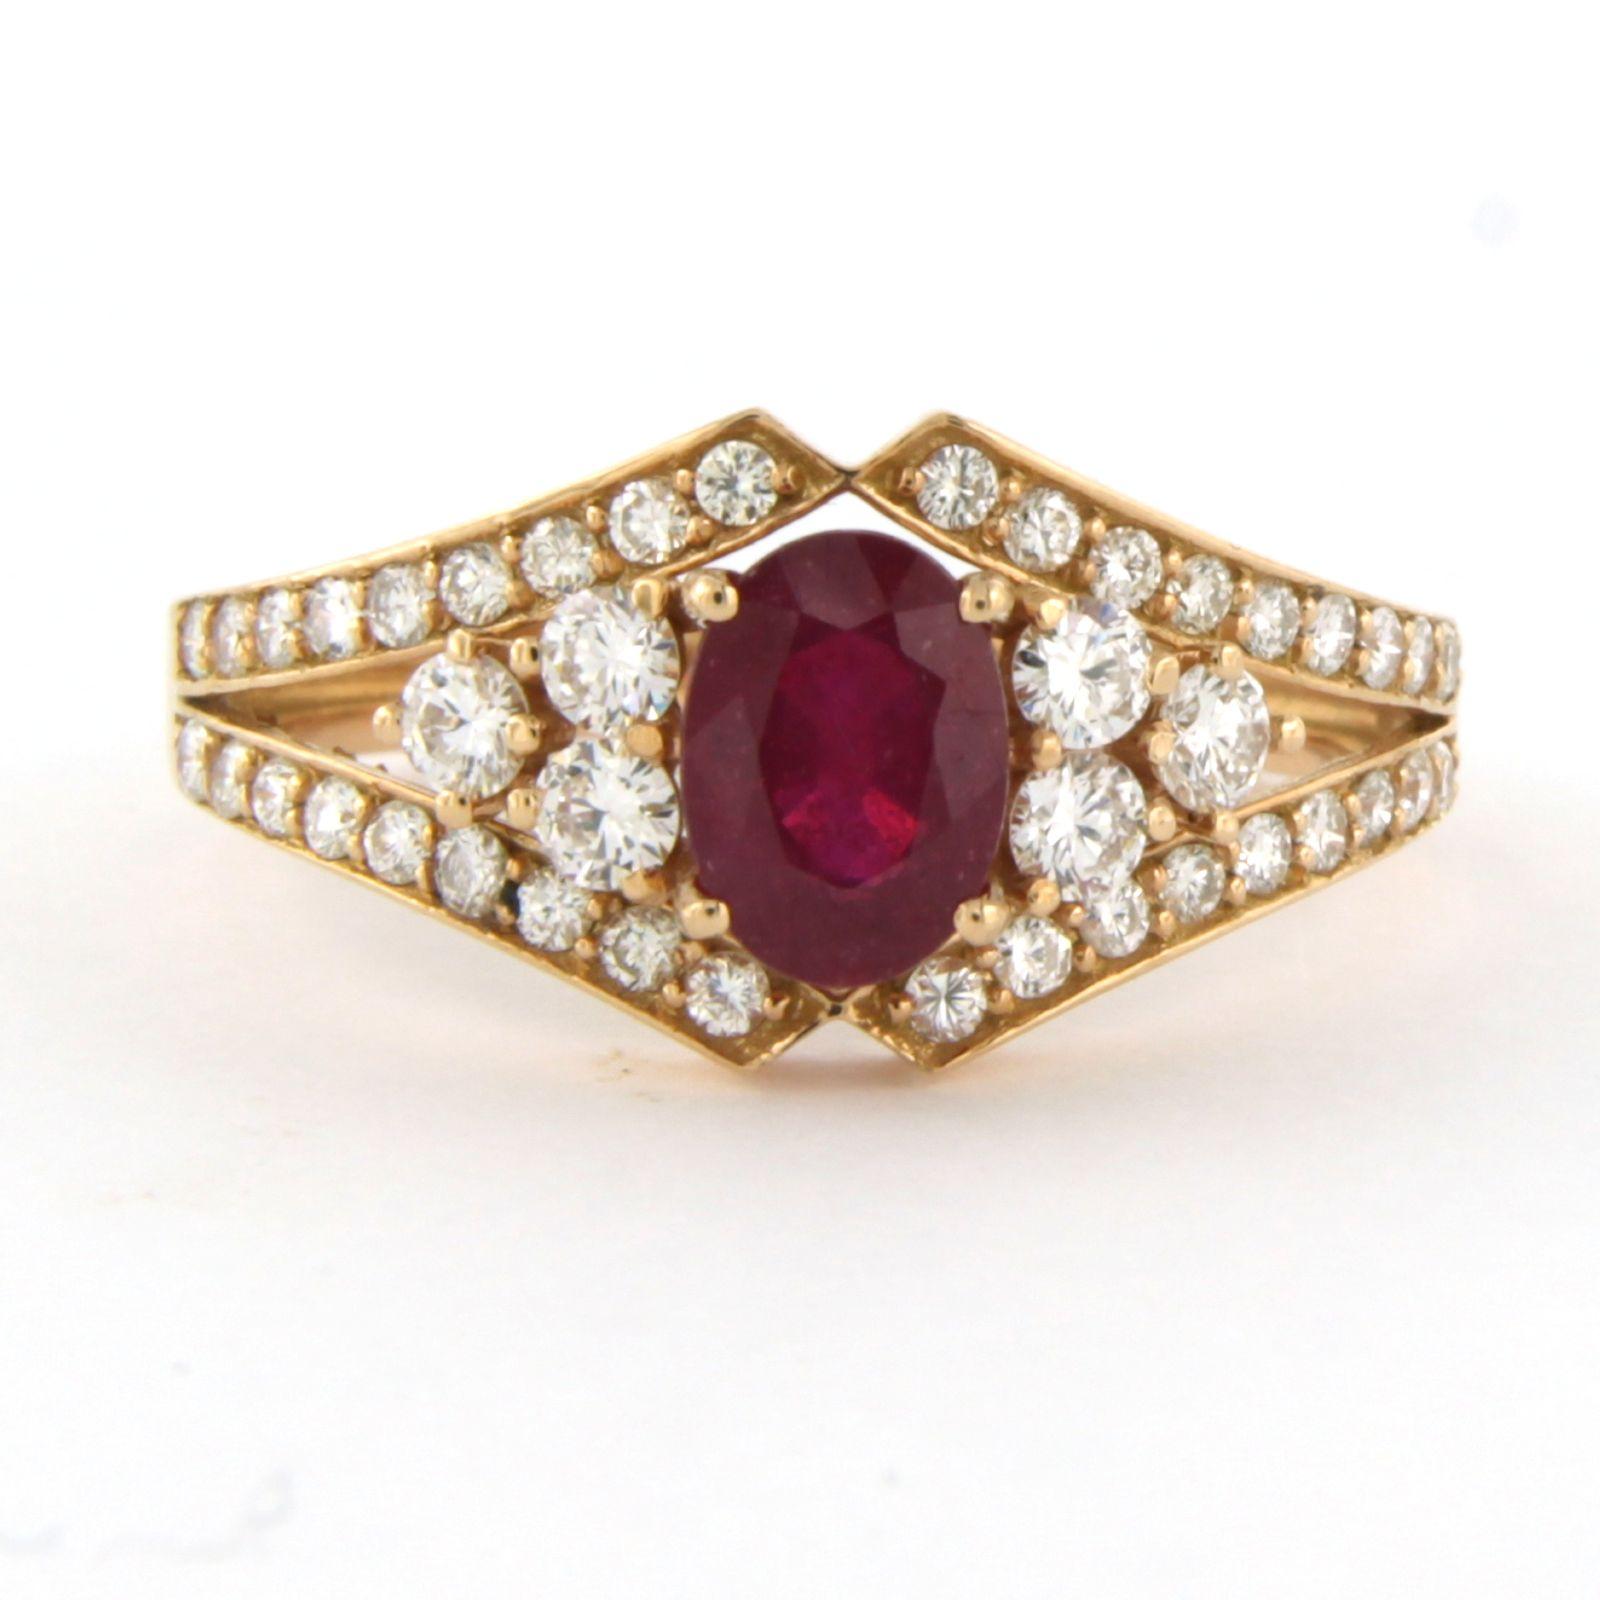 18k pink gold ring set with ruby. 1.18ct and brilliant cut diamonds up to. 0.64ct - F/G - VS/SI - ring size U.S. 7.25 - EU. 17.5(55)

detailed description

the top of the ring is 1.0 cm wide

ring size U.S. 7.25 - EU. 17.5(55), the ring can be